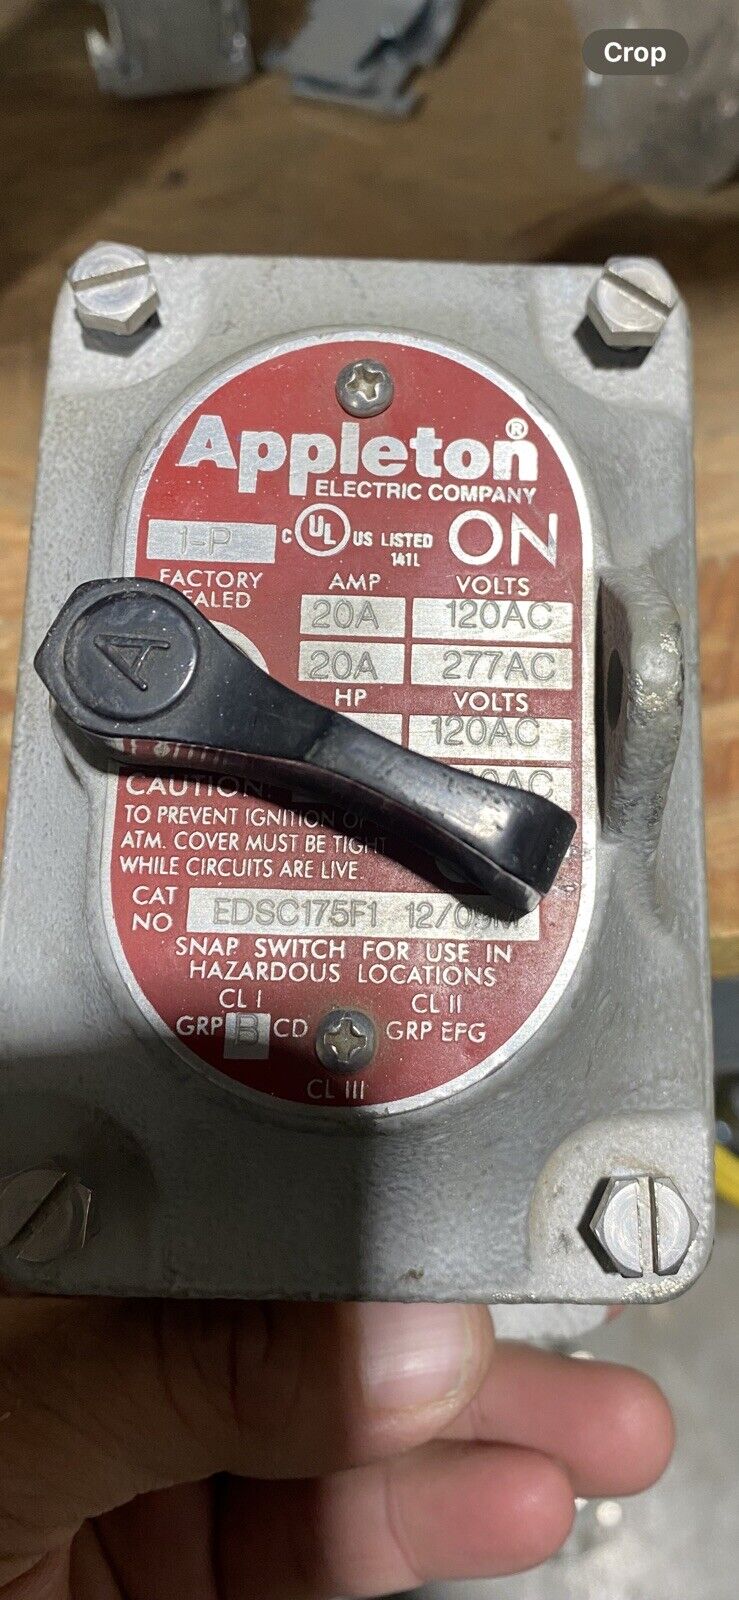 Appleton EDSC175F1 Explosion Proof Switch and Box Used Pullouts, All Operable